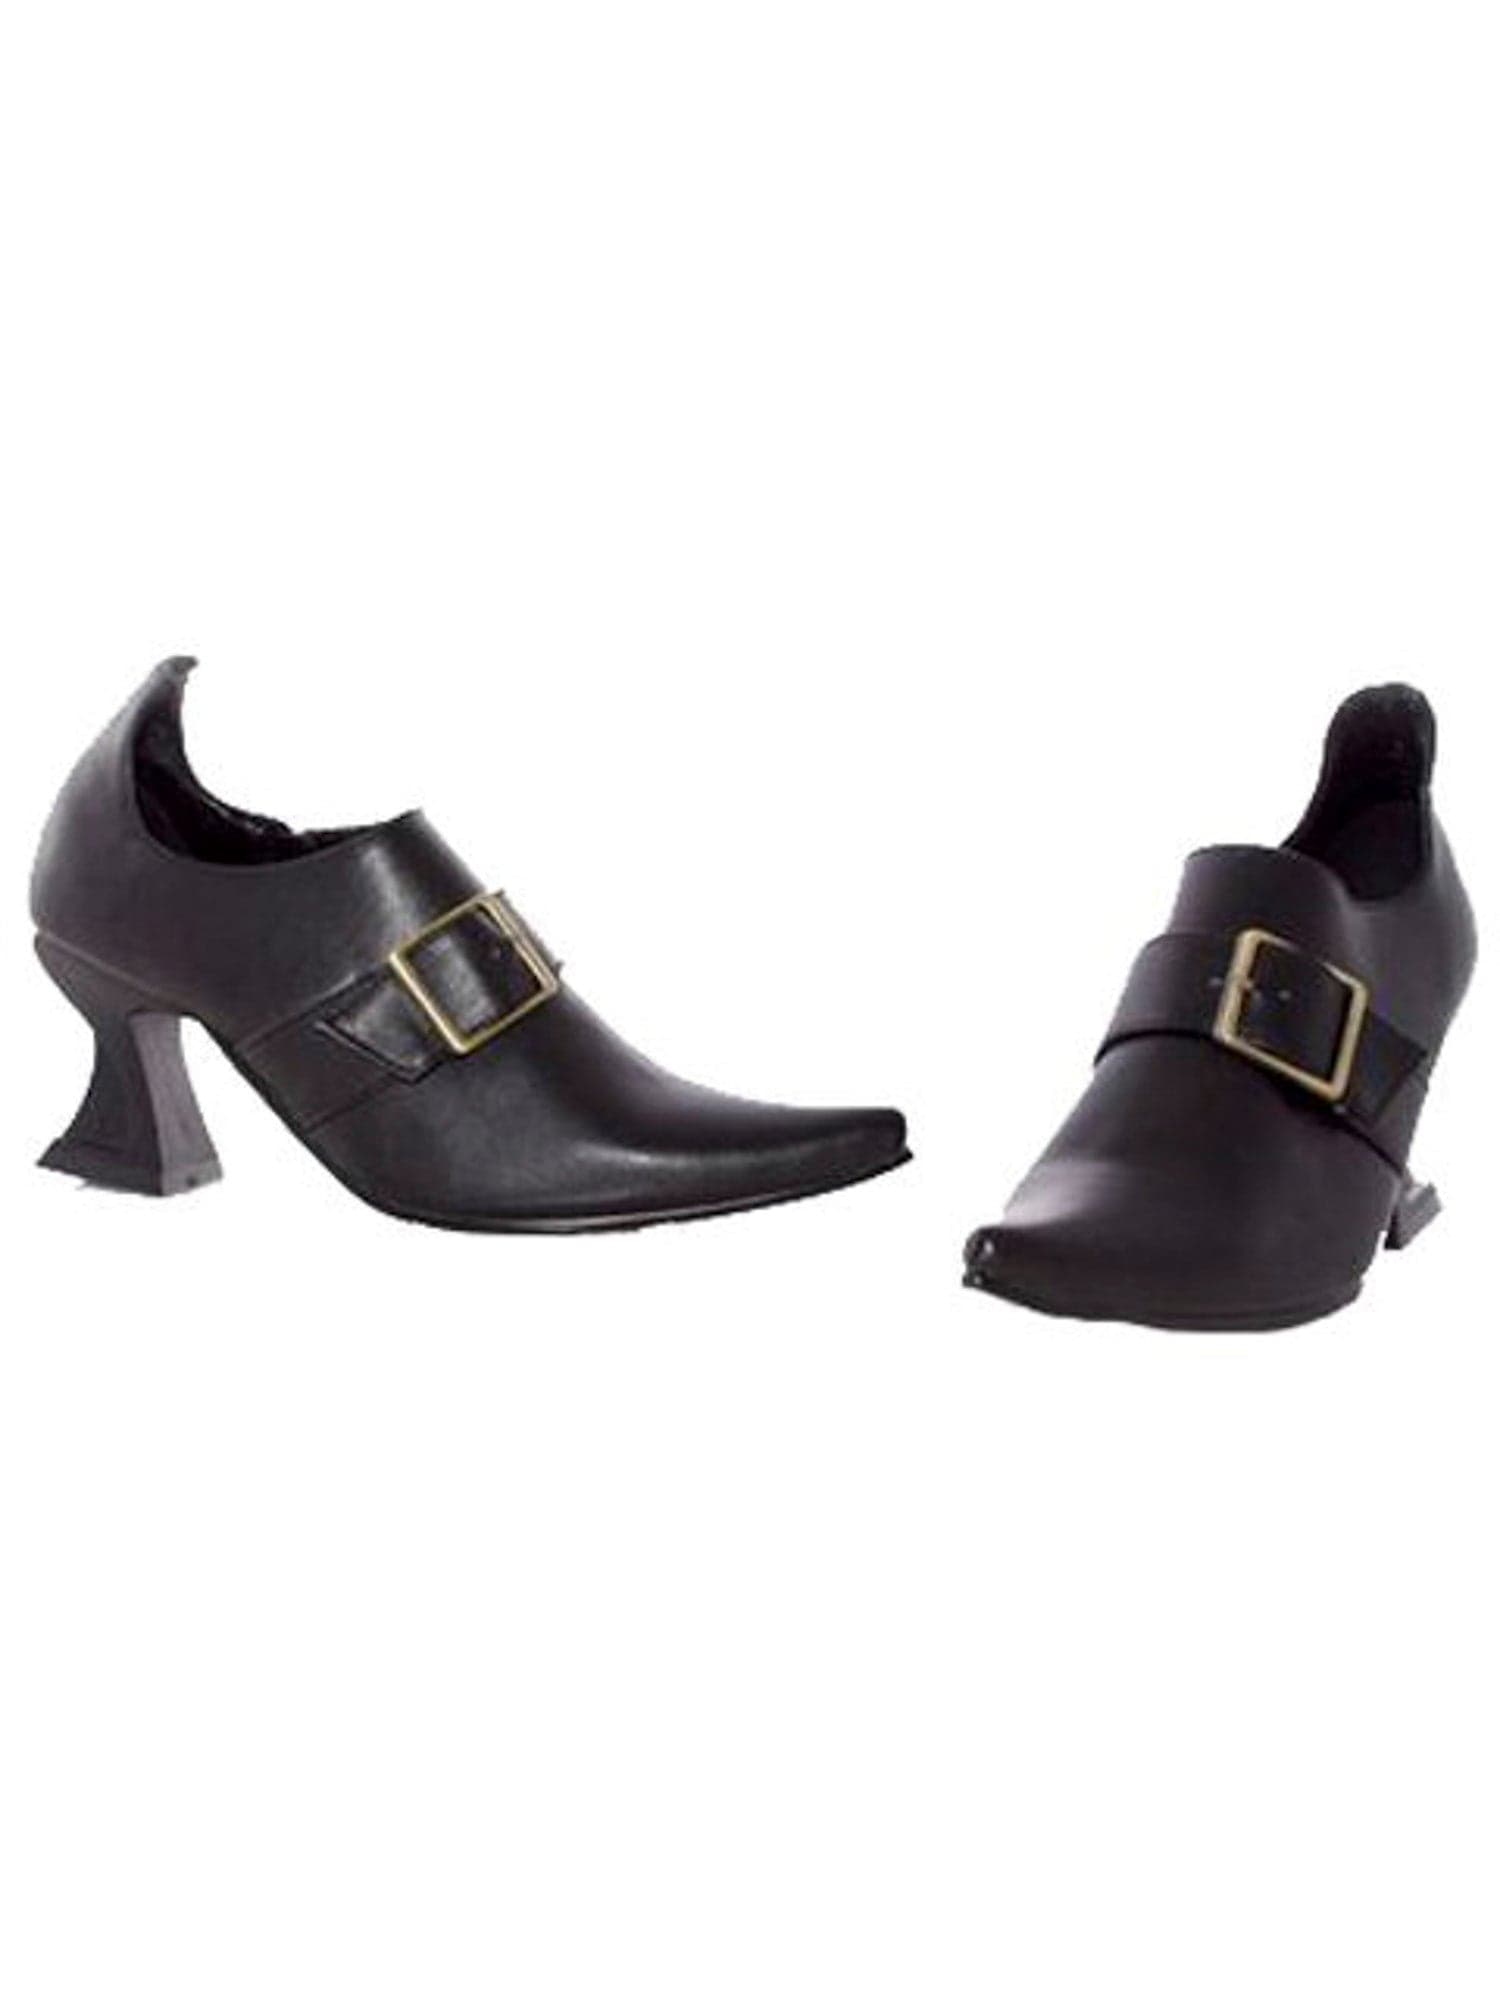 Kids Black Witch Shoes - costumes.com